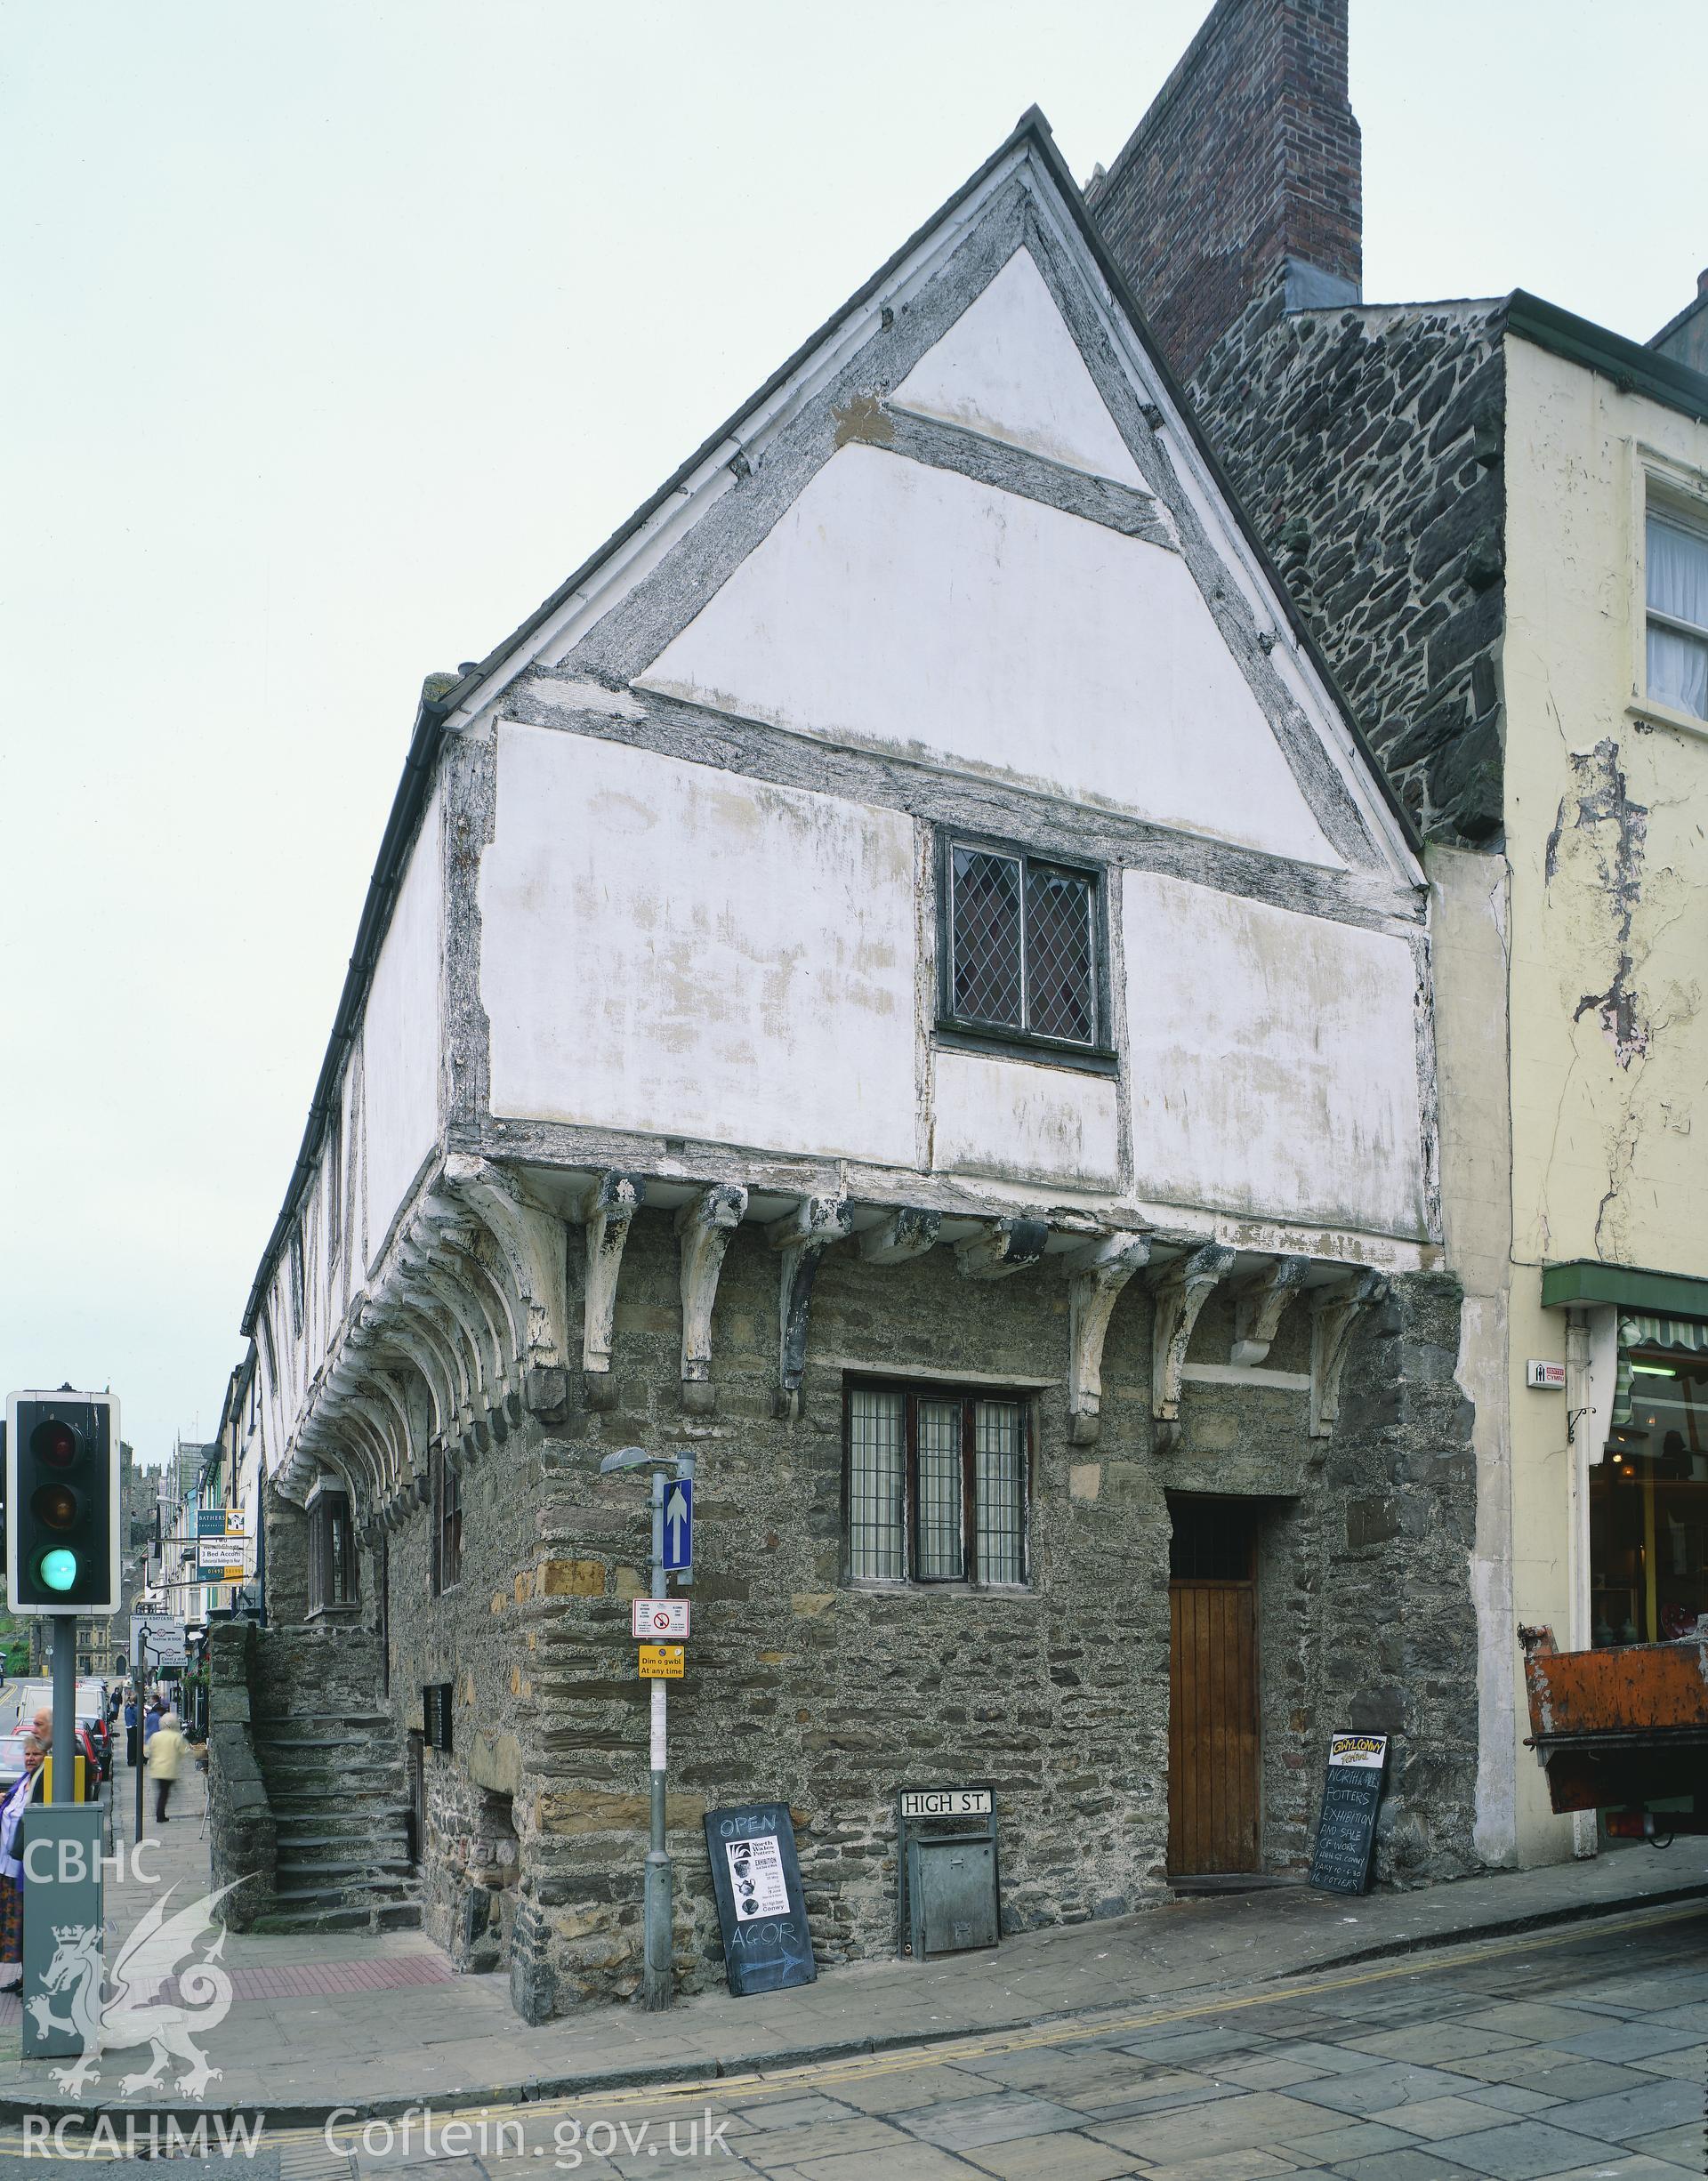 RCAHMW colour transparency showing exterior view of Aberconwy House, Conwy.